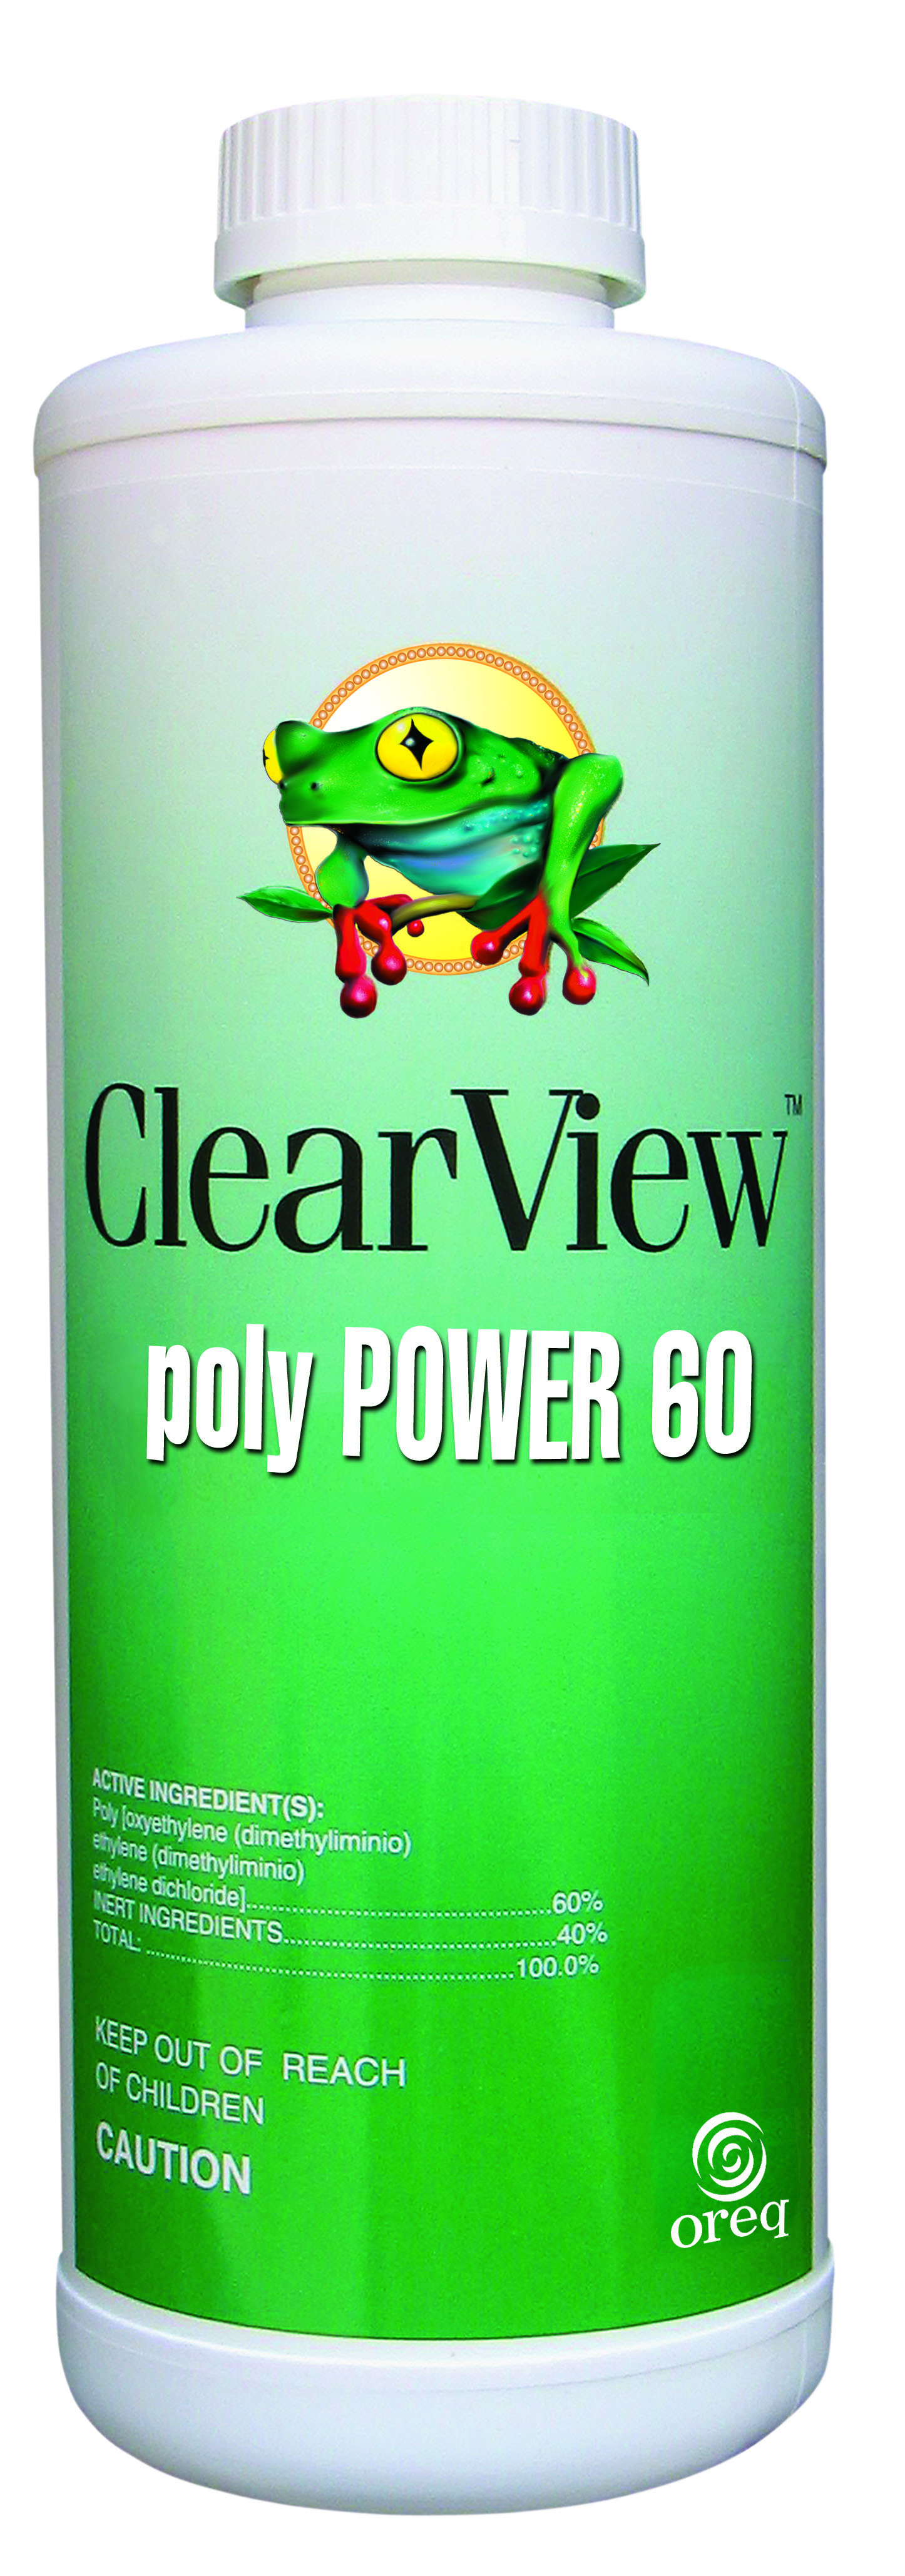 Clearview Polypower 60 12 X 1 qt